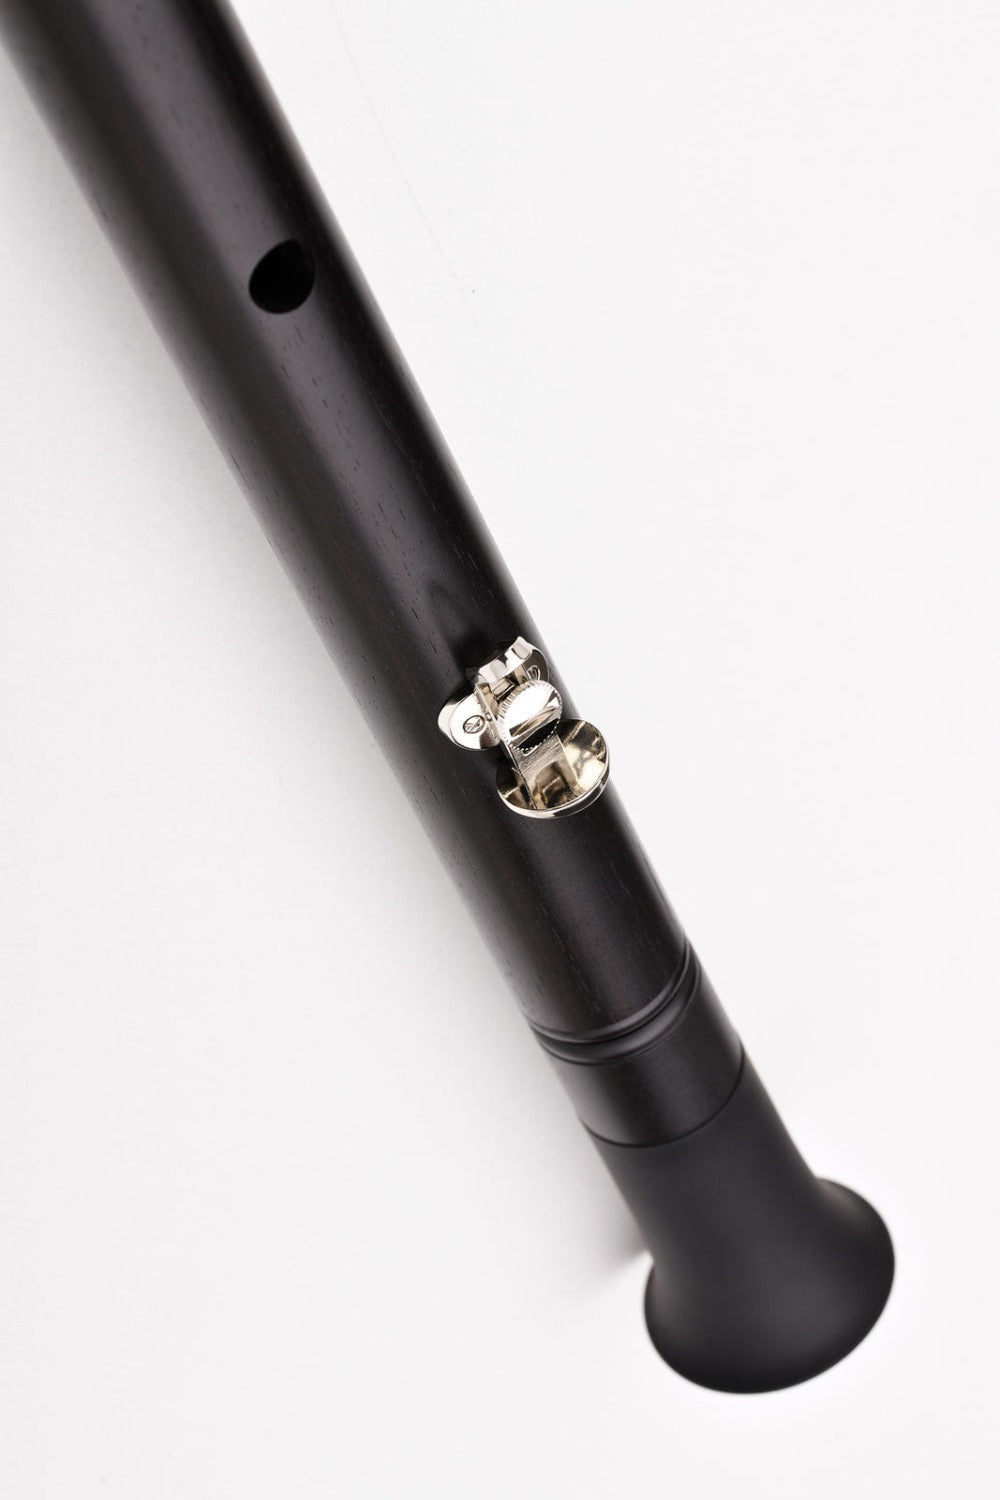 rear view of pocket clarinet showing thumbrest and thumb hole